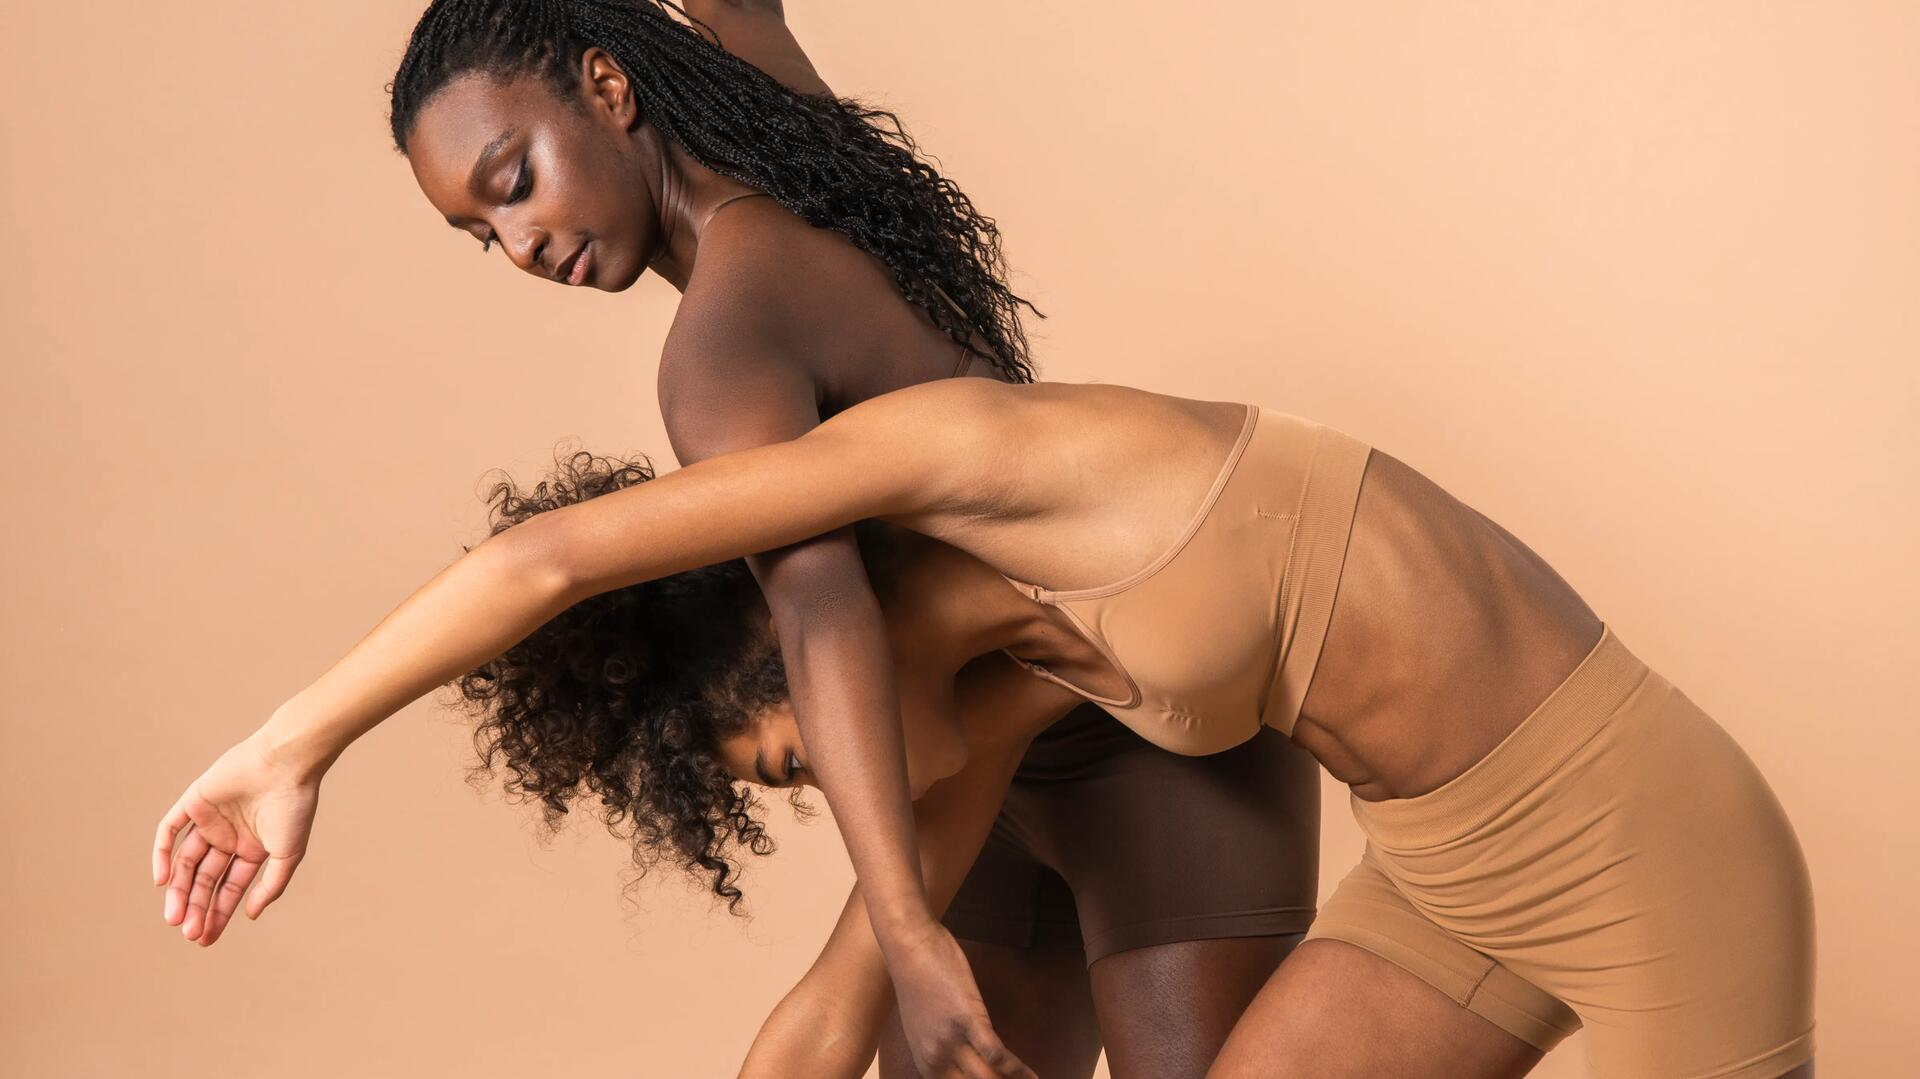 Two women dancing with expressive movement